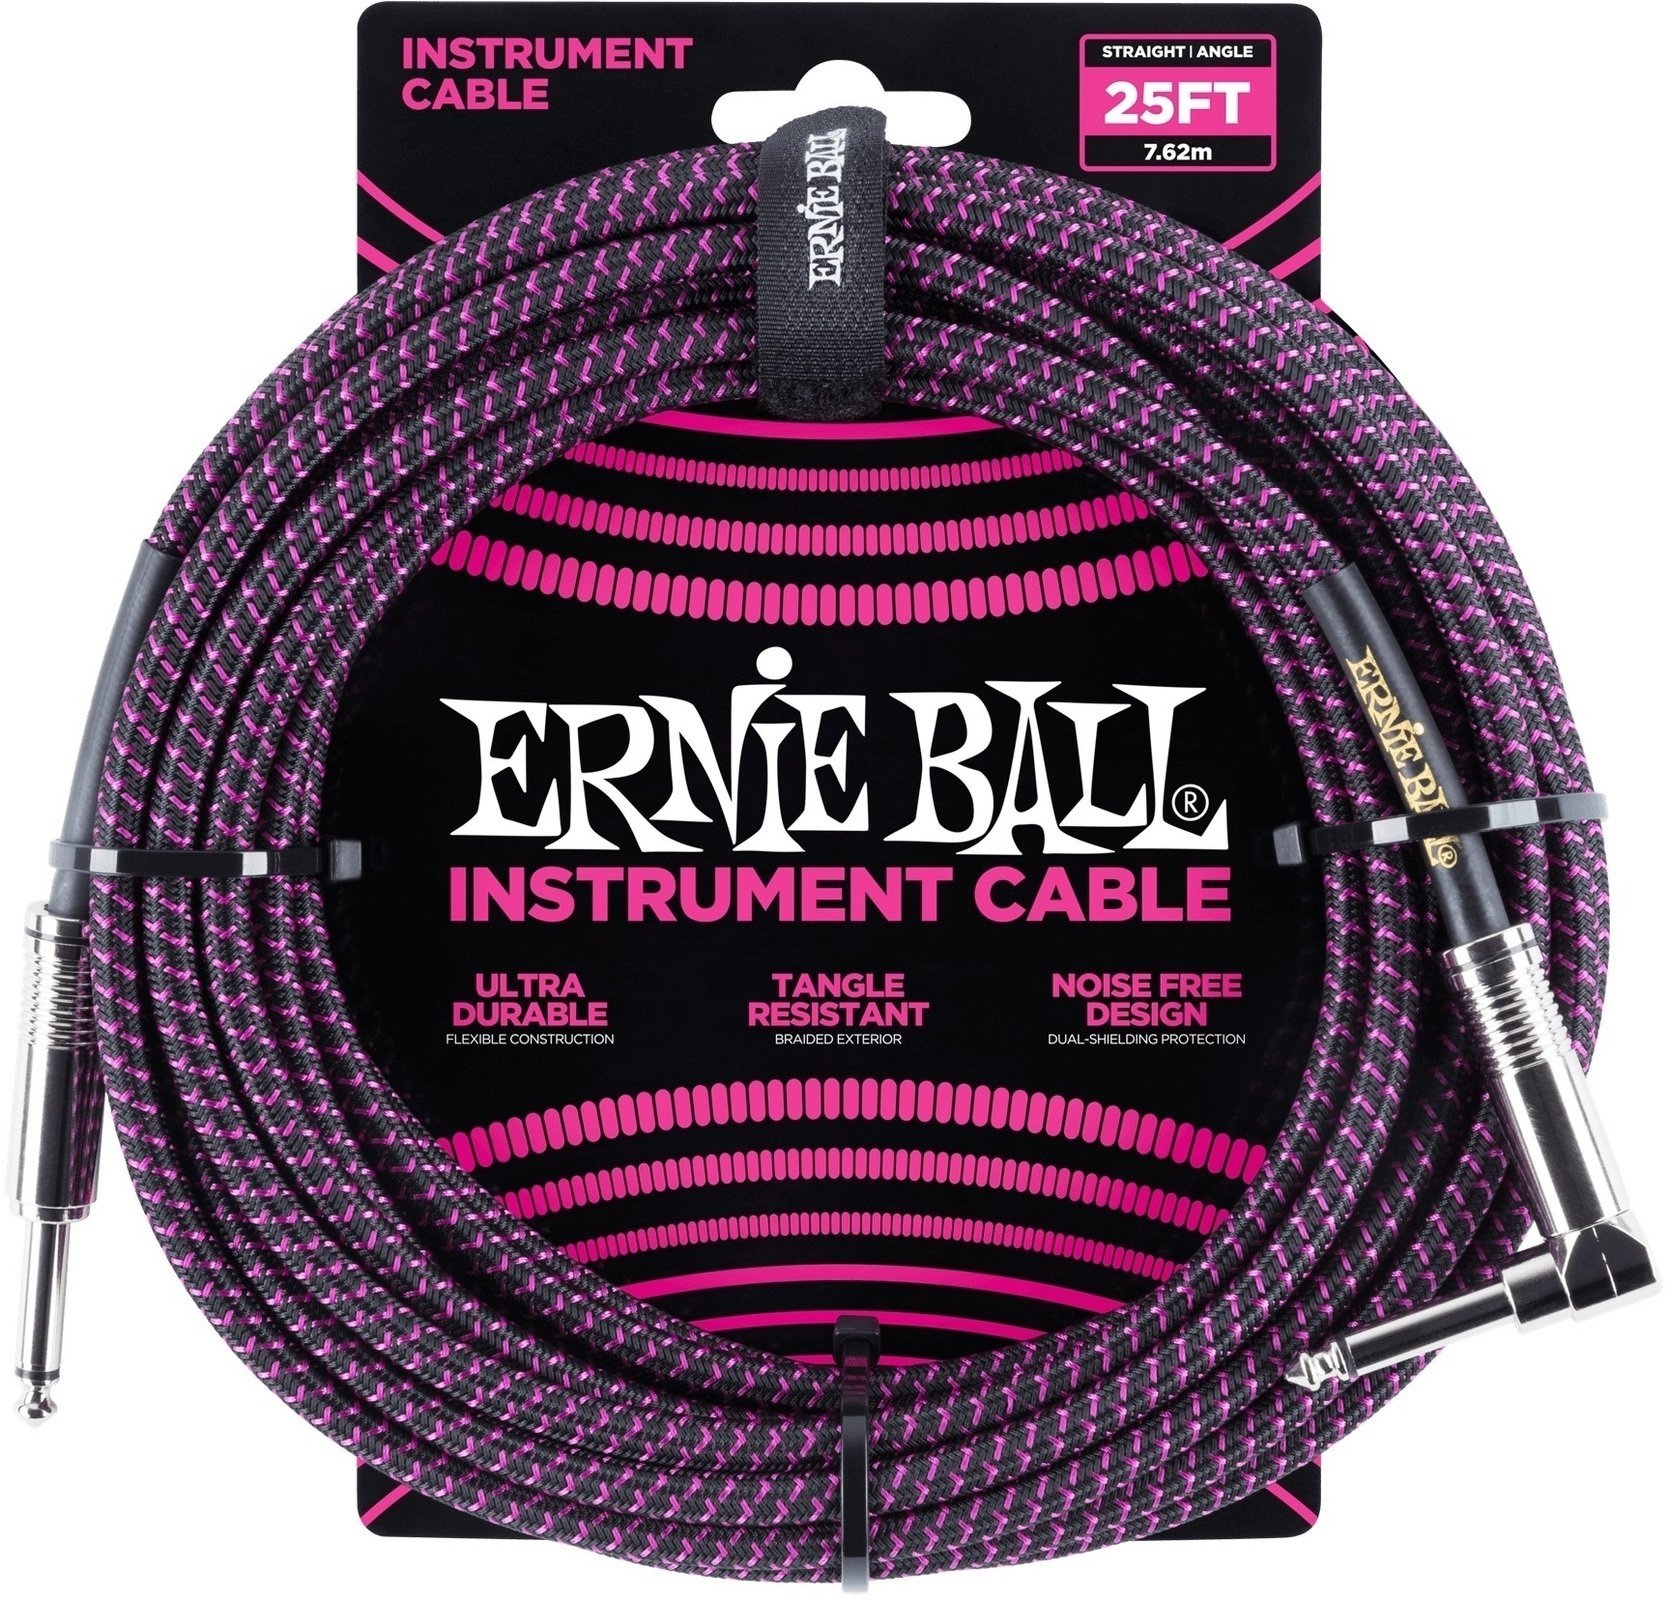 Instrument Cable Ernie Ball P06068 Black-Violet 7,5 m Straight - Angled